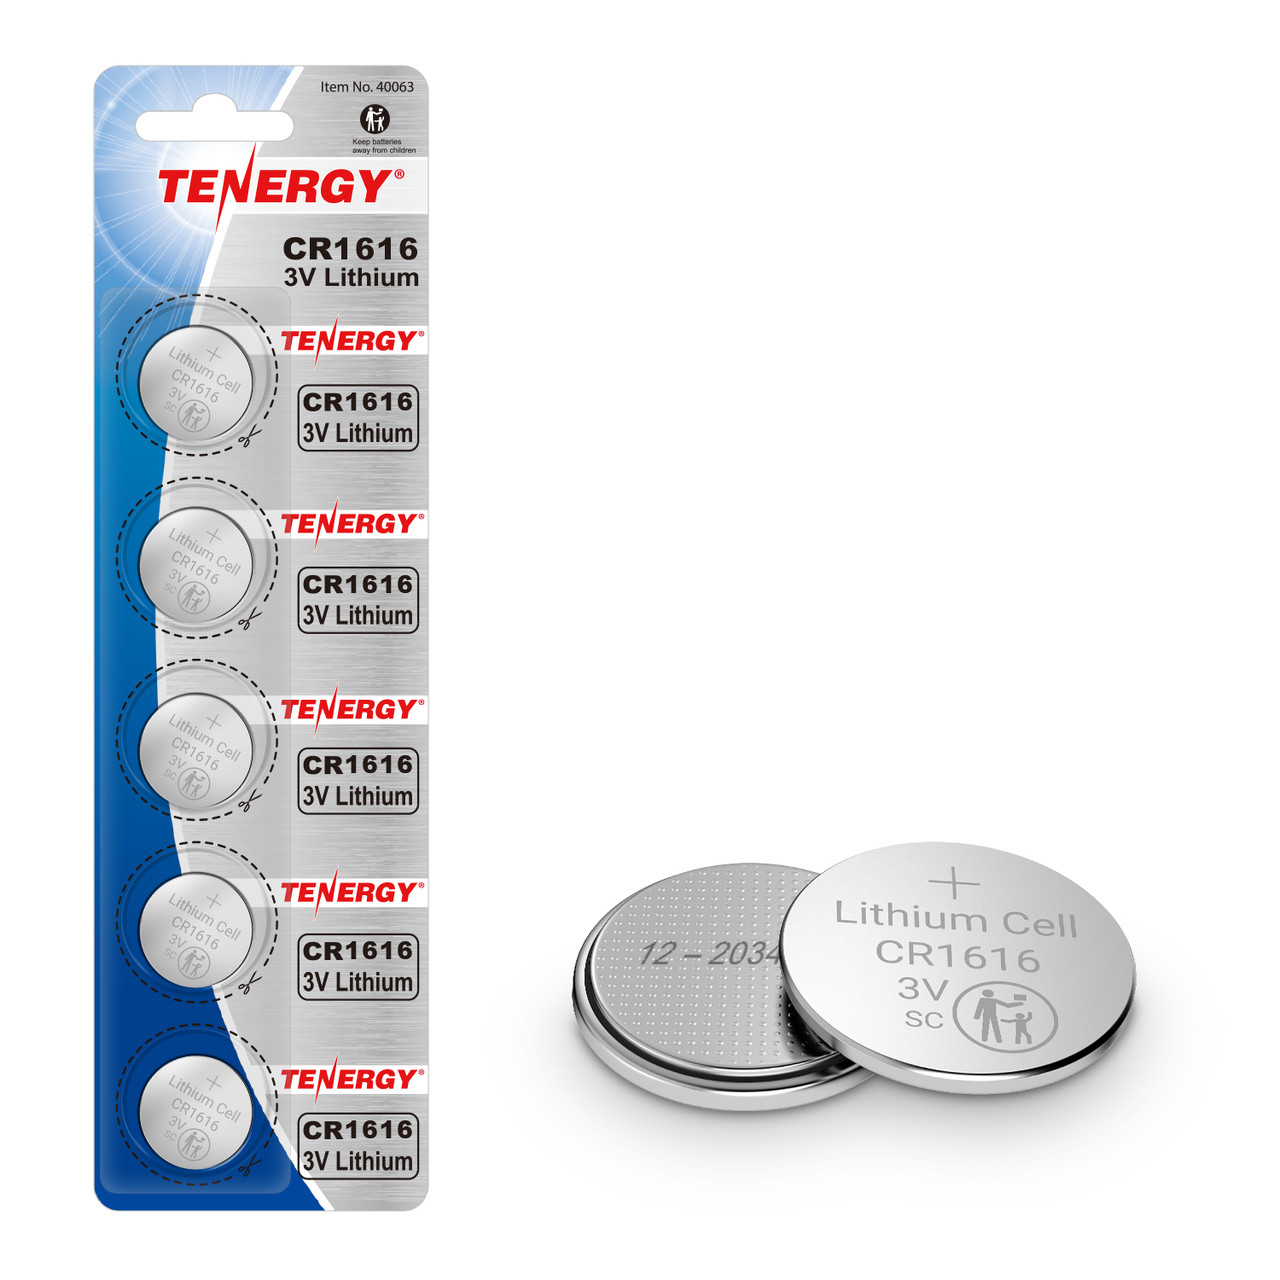 Tenergy CR1616 3V Lithium Button Cells 5 Pack (1 Card) - Tenergy Power